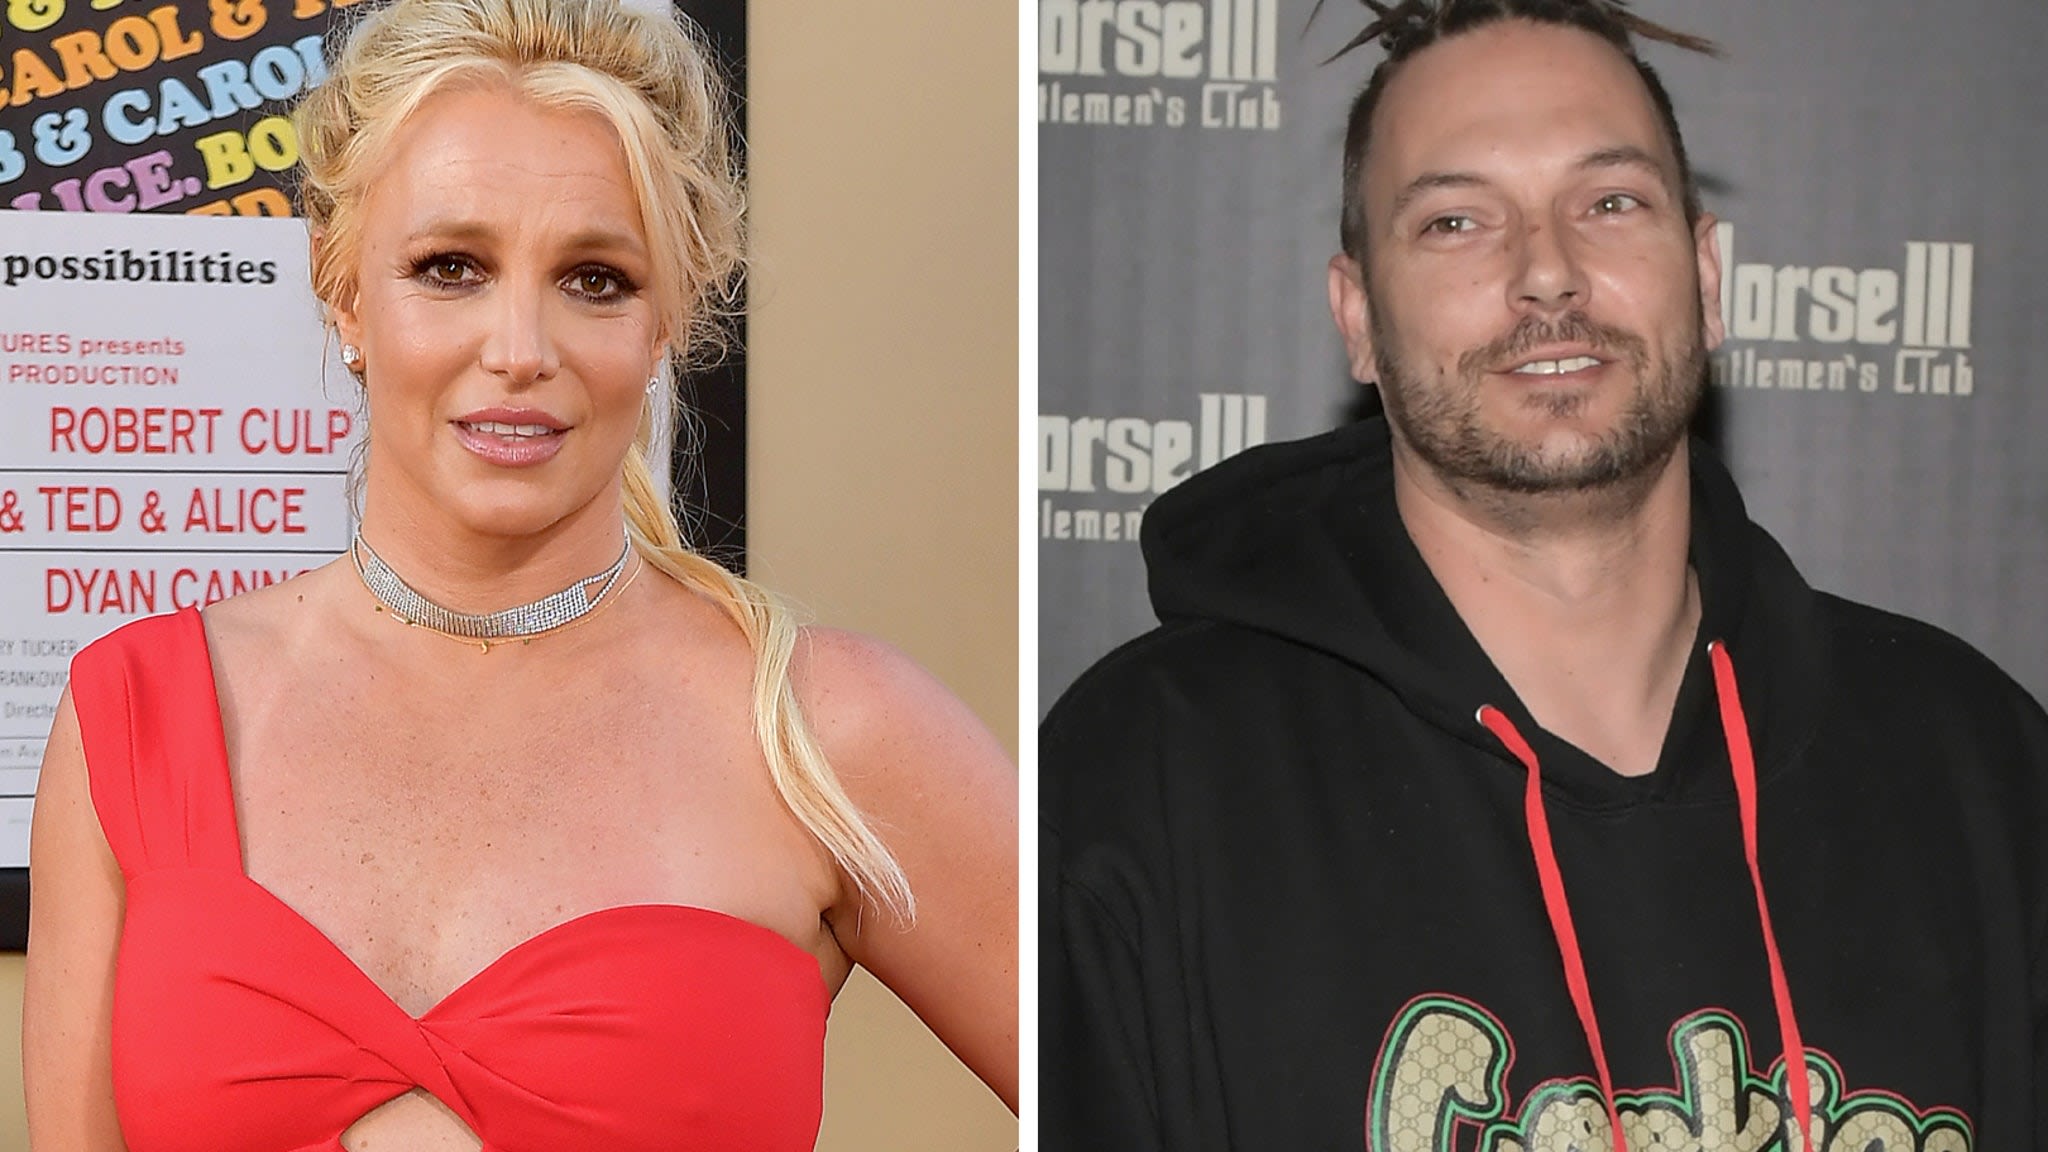 Britney Spears and Sons Have Spoken, Kevin Federline's Attorney Calls It 'Step In Right Direction'